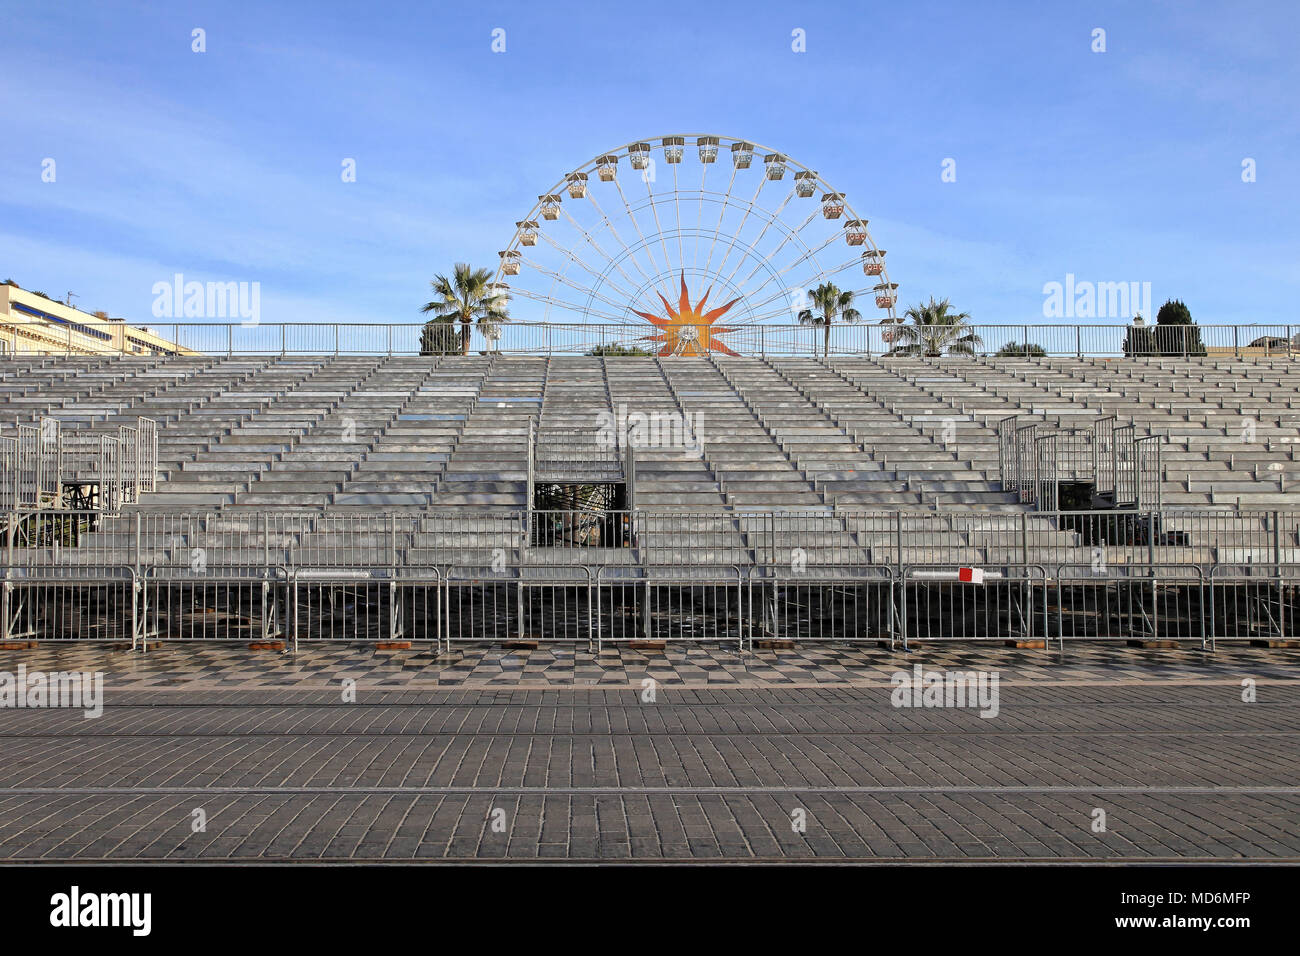 Temporary Metal Stands for Festival in Nice Stock Photo